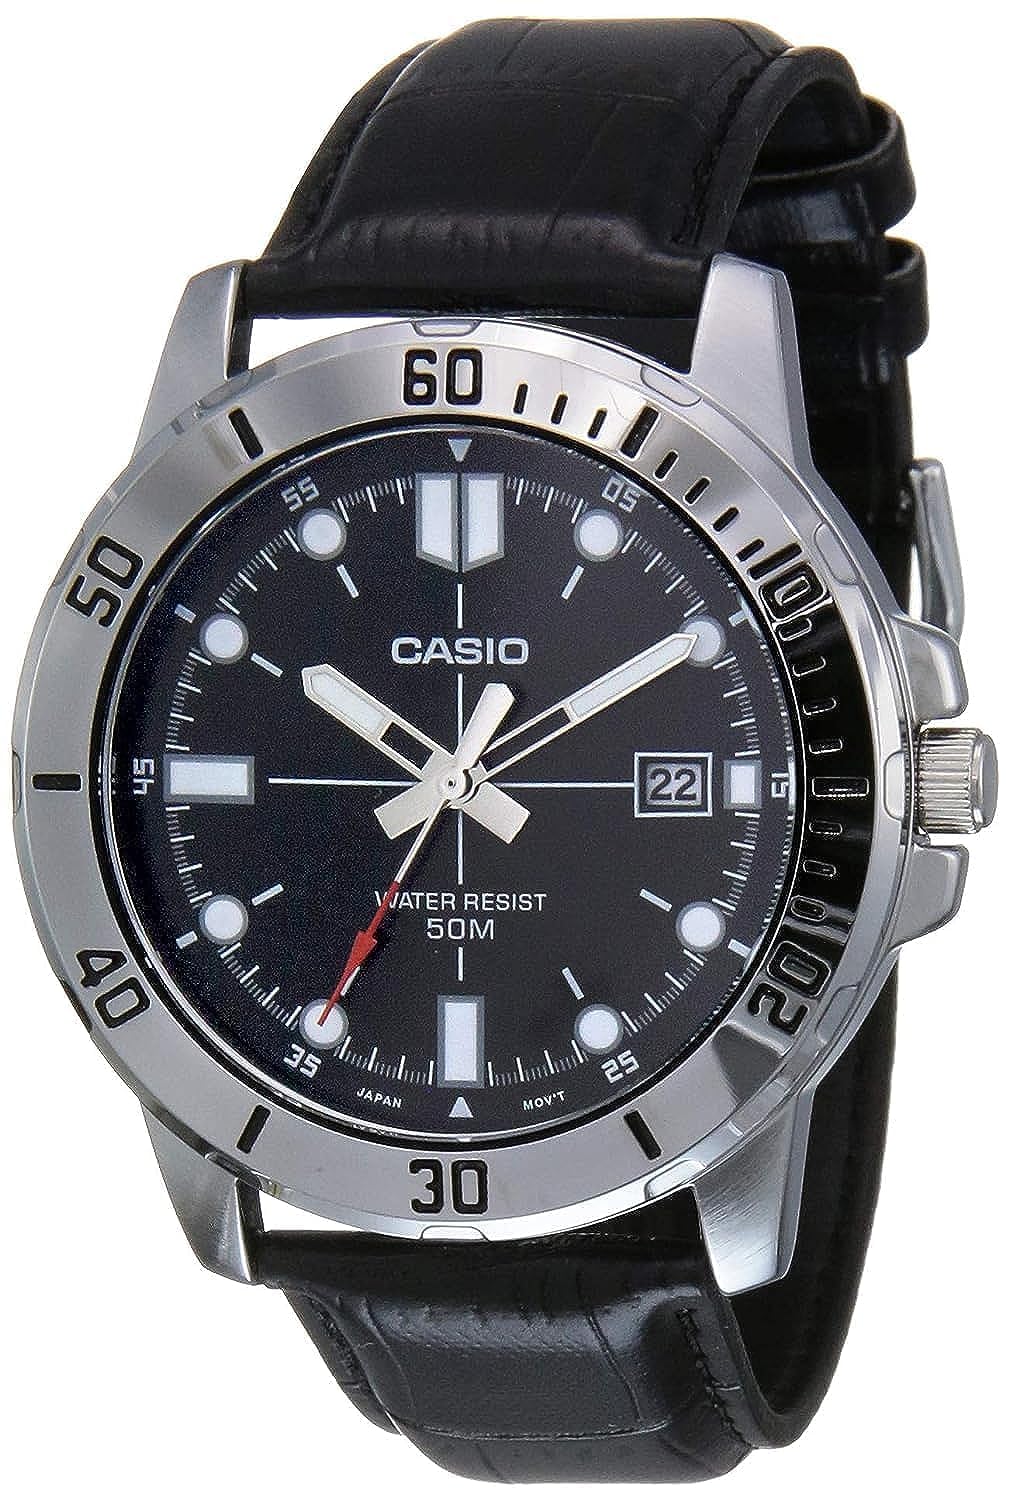 Casio MTP-VD01L-1EV Men's Enticer Stainless Steel Black Dial Casual Analog Sporty Watch